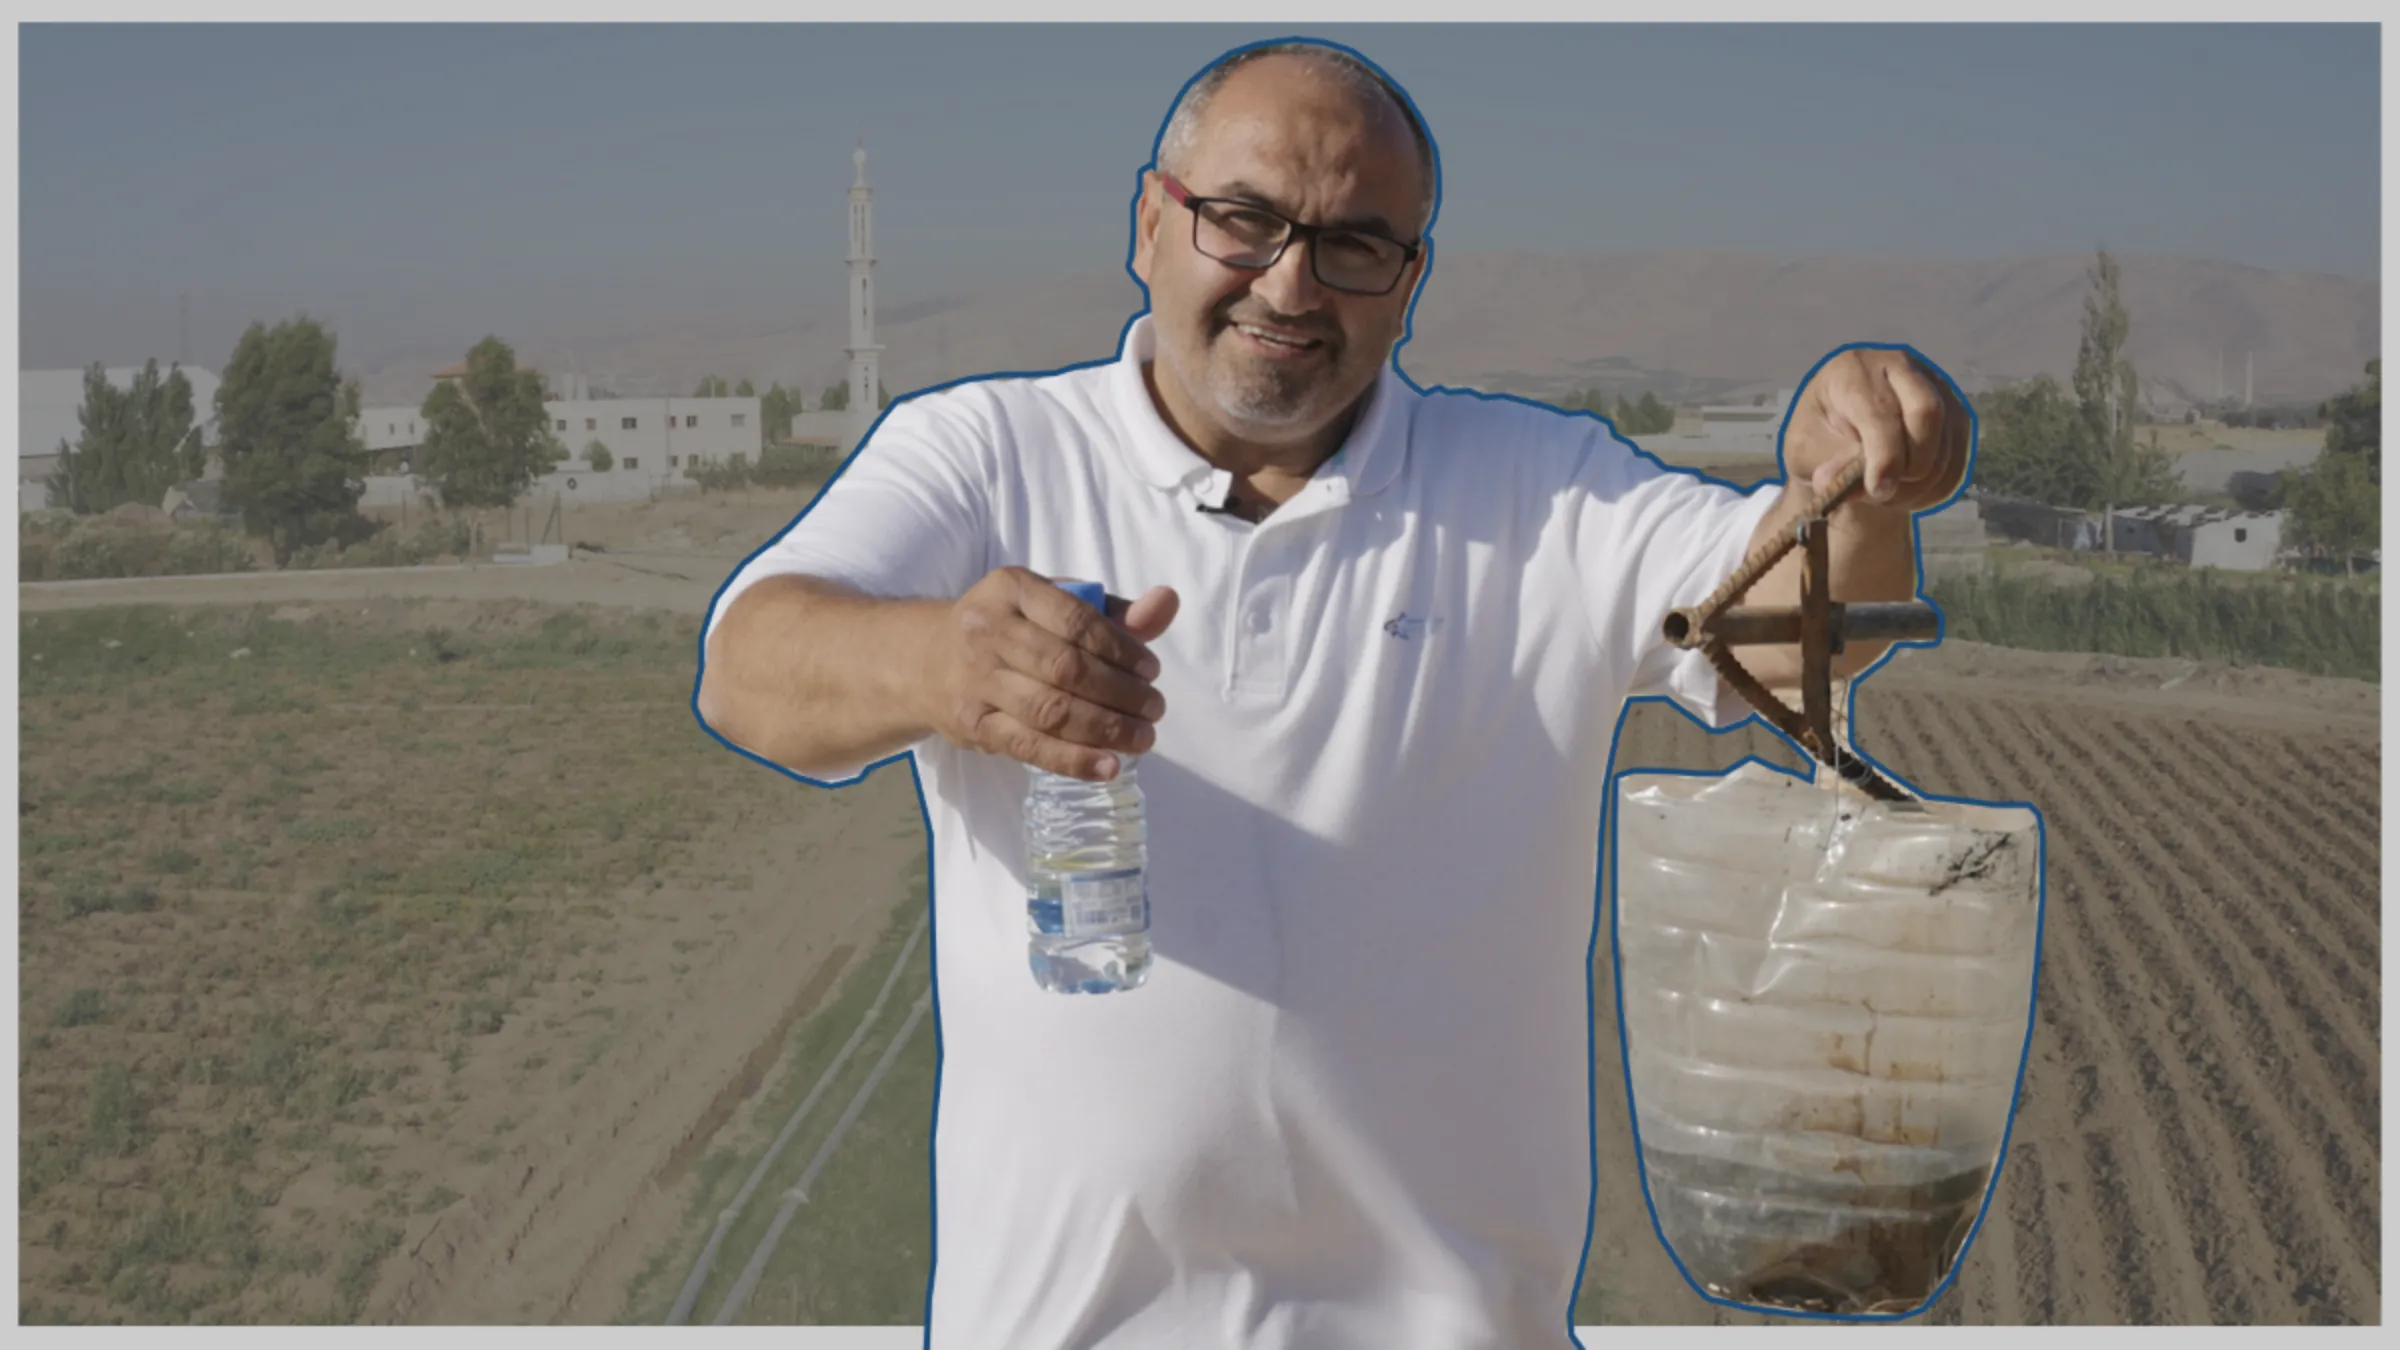 Bilai Houshaymi, an independent MP in the Bekaa Valley, Lebanon, holds a bottle of water next to a bucket of polluted groundwater in this screen grab from the Context video What happens when a country runs out of water?. Thomson Reuters Foundation/Fintan McDonnell